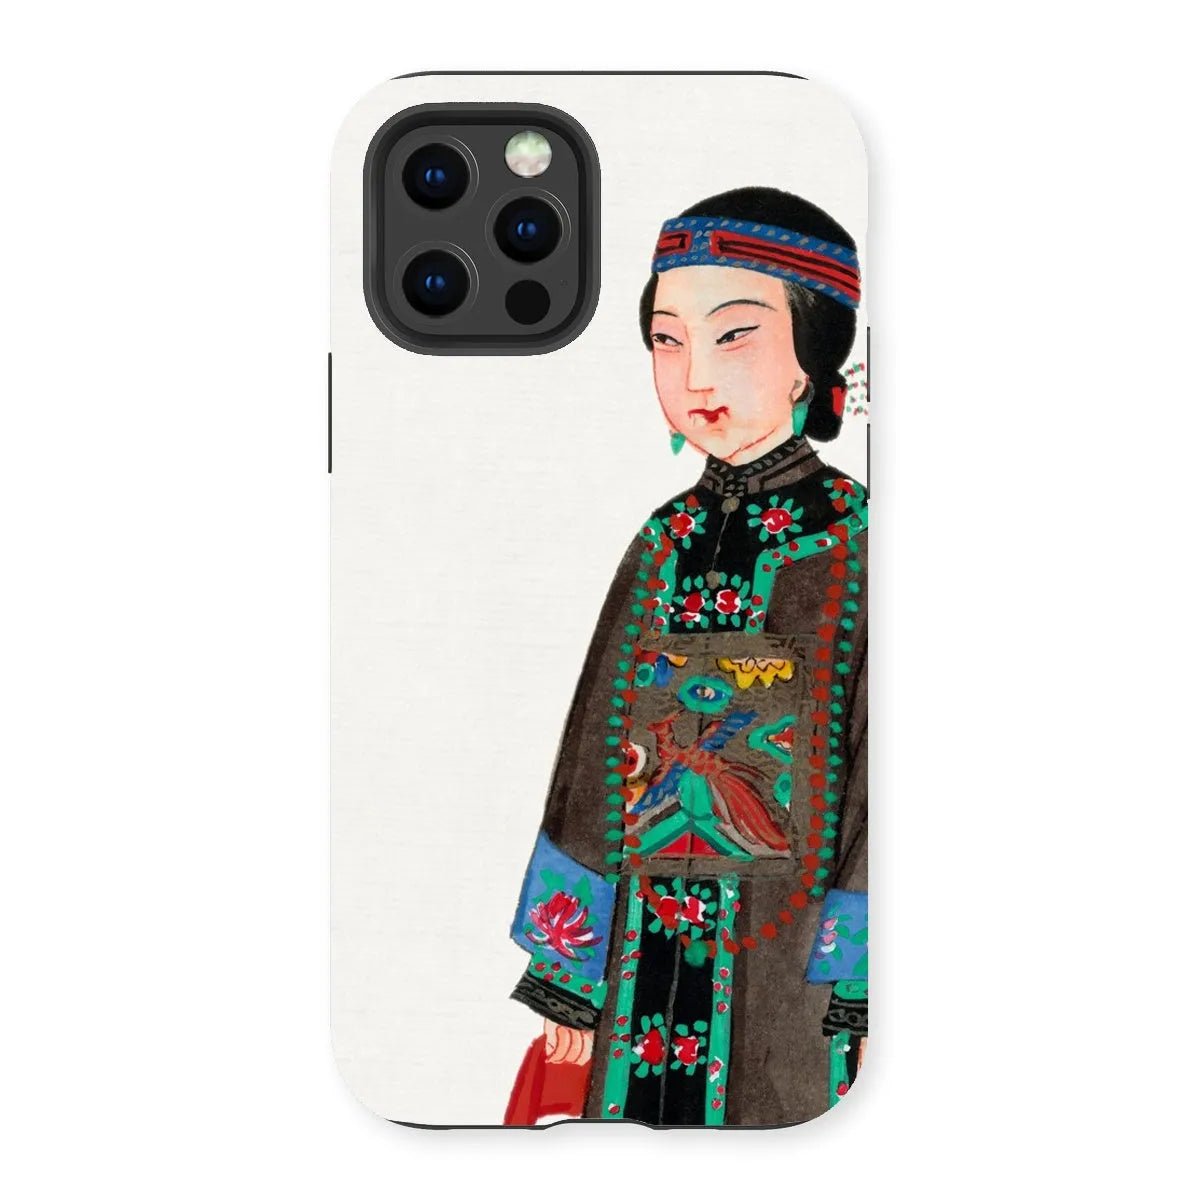 Noblewoman At Court - Chinese Aesthetic Art Phone Case - Iphone 13 Pro / Matte - Mobile Phone Cases - Aesthetic Art